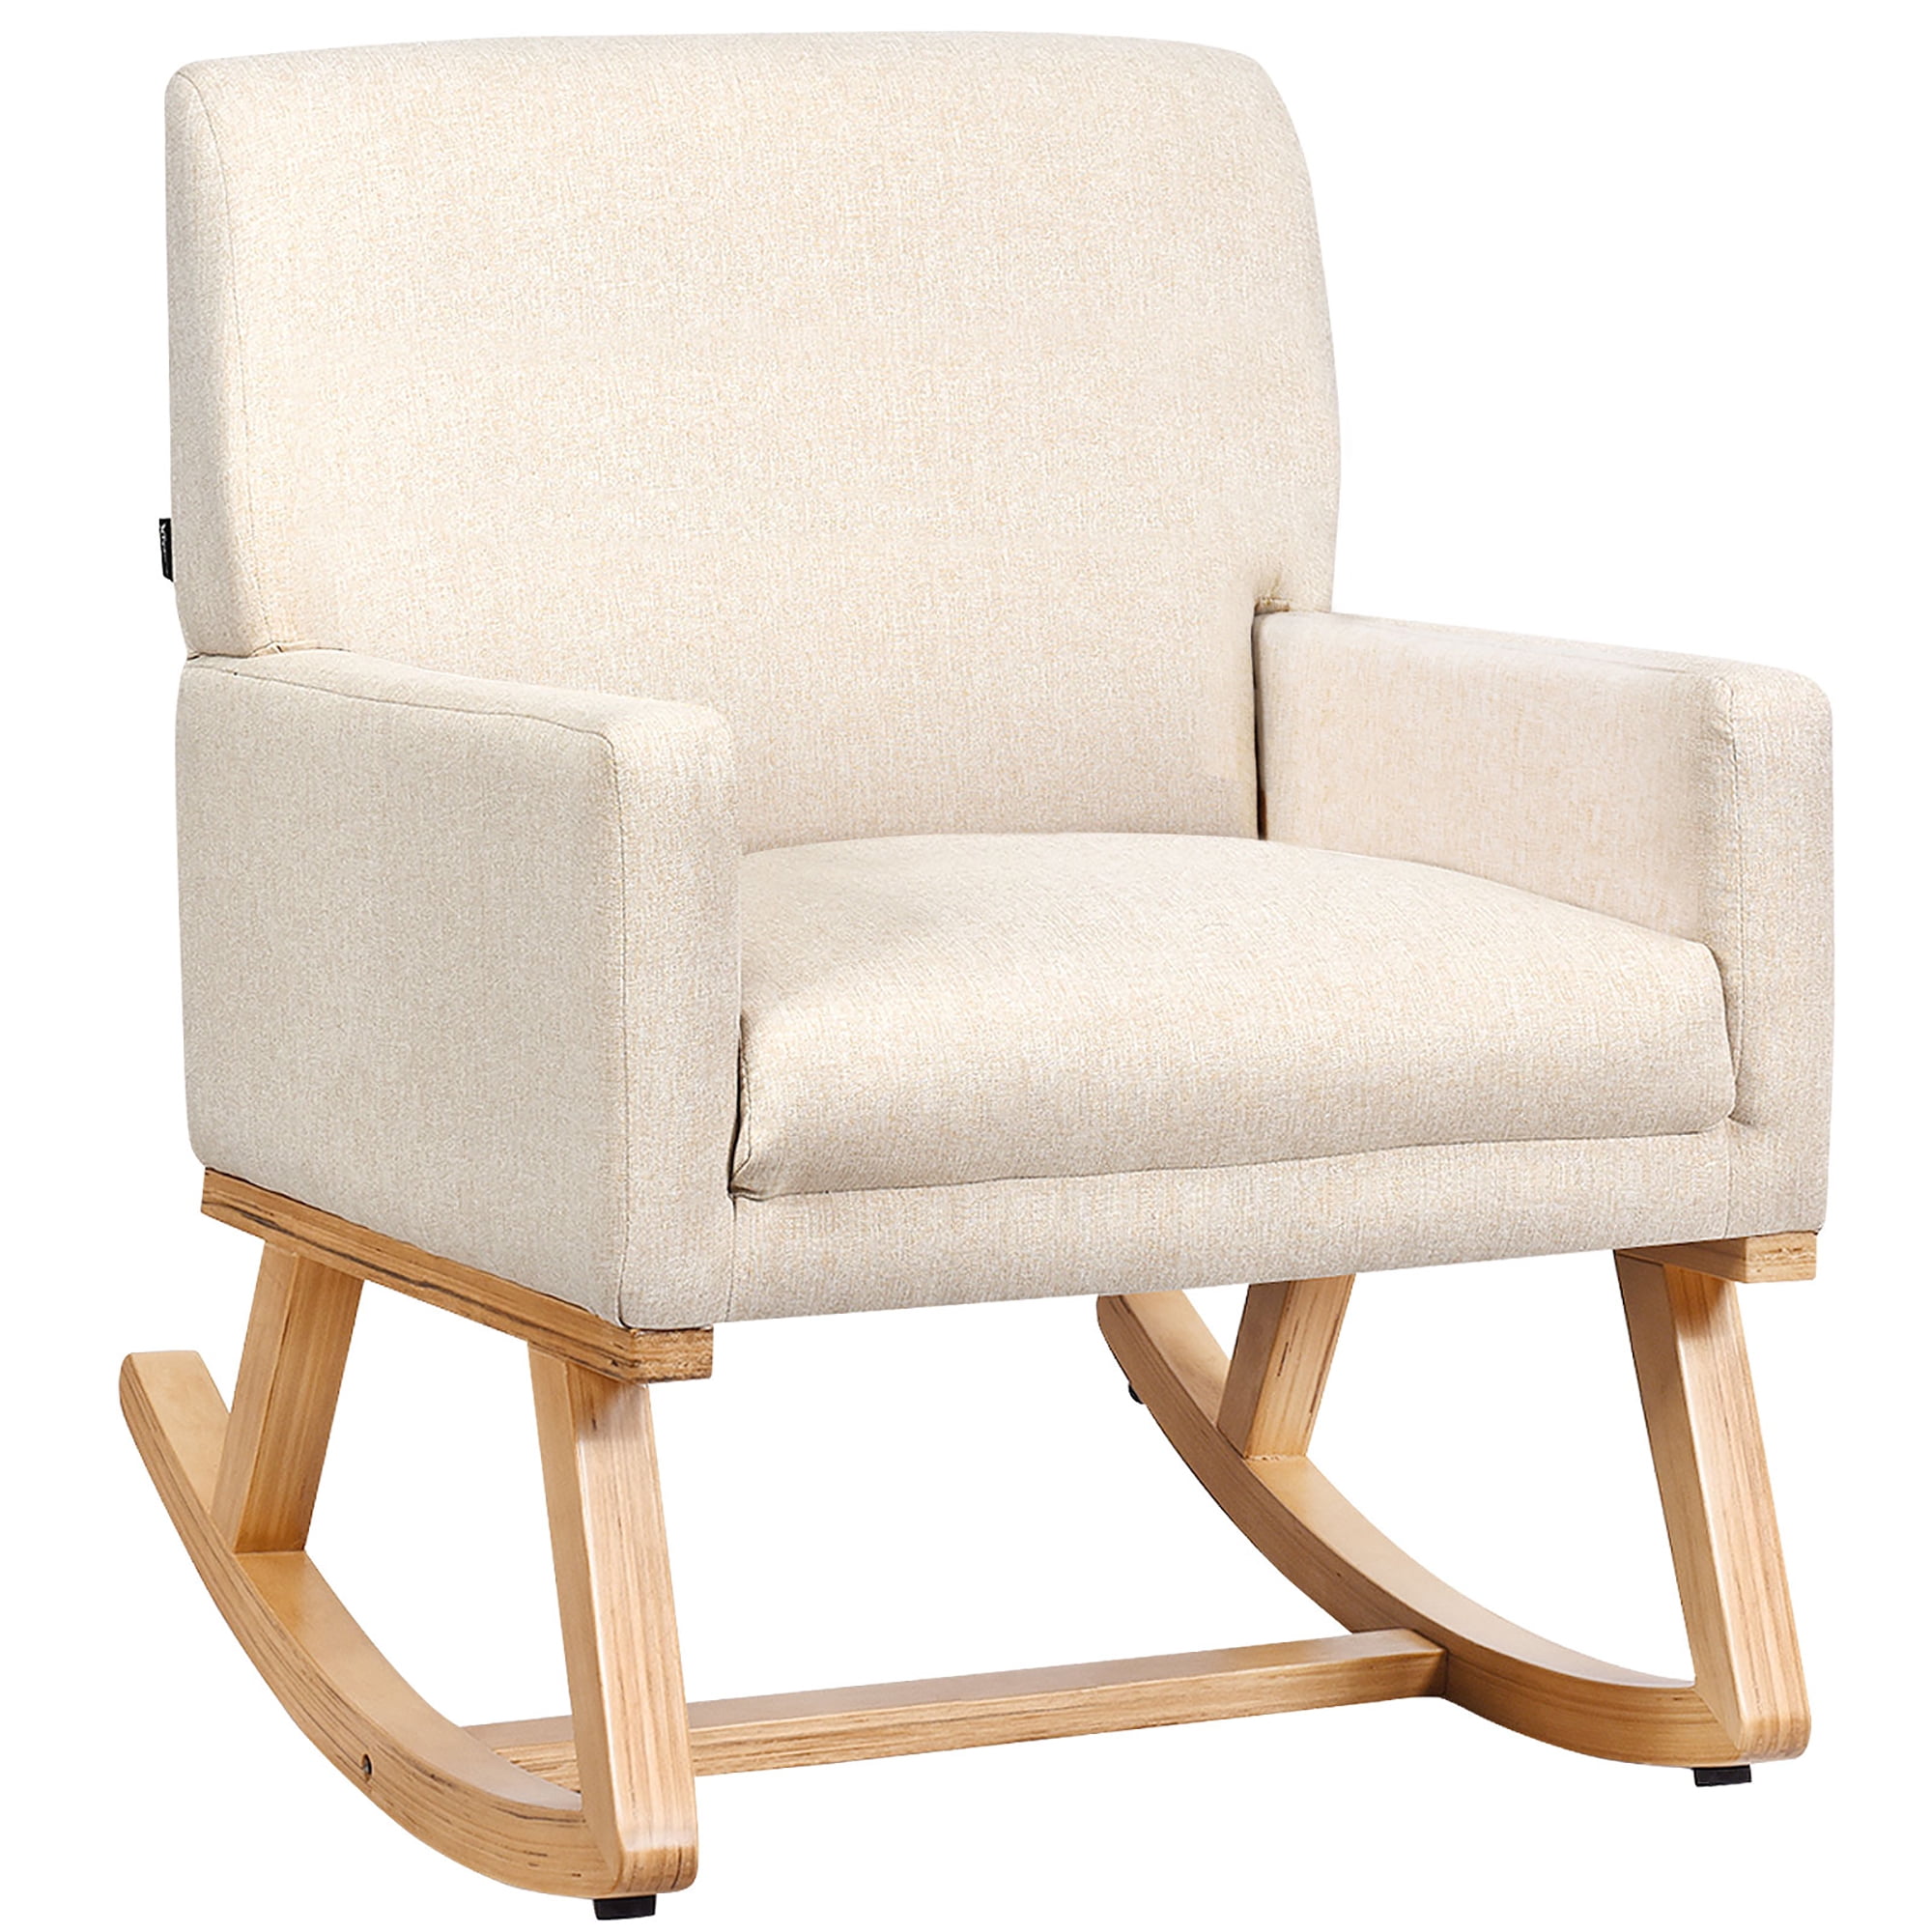 Beige Kimave Mid Century Modern Rocking Chair Velvet Tufted Upholtered Accent Chair for Living Room Bedroom 